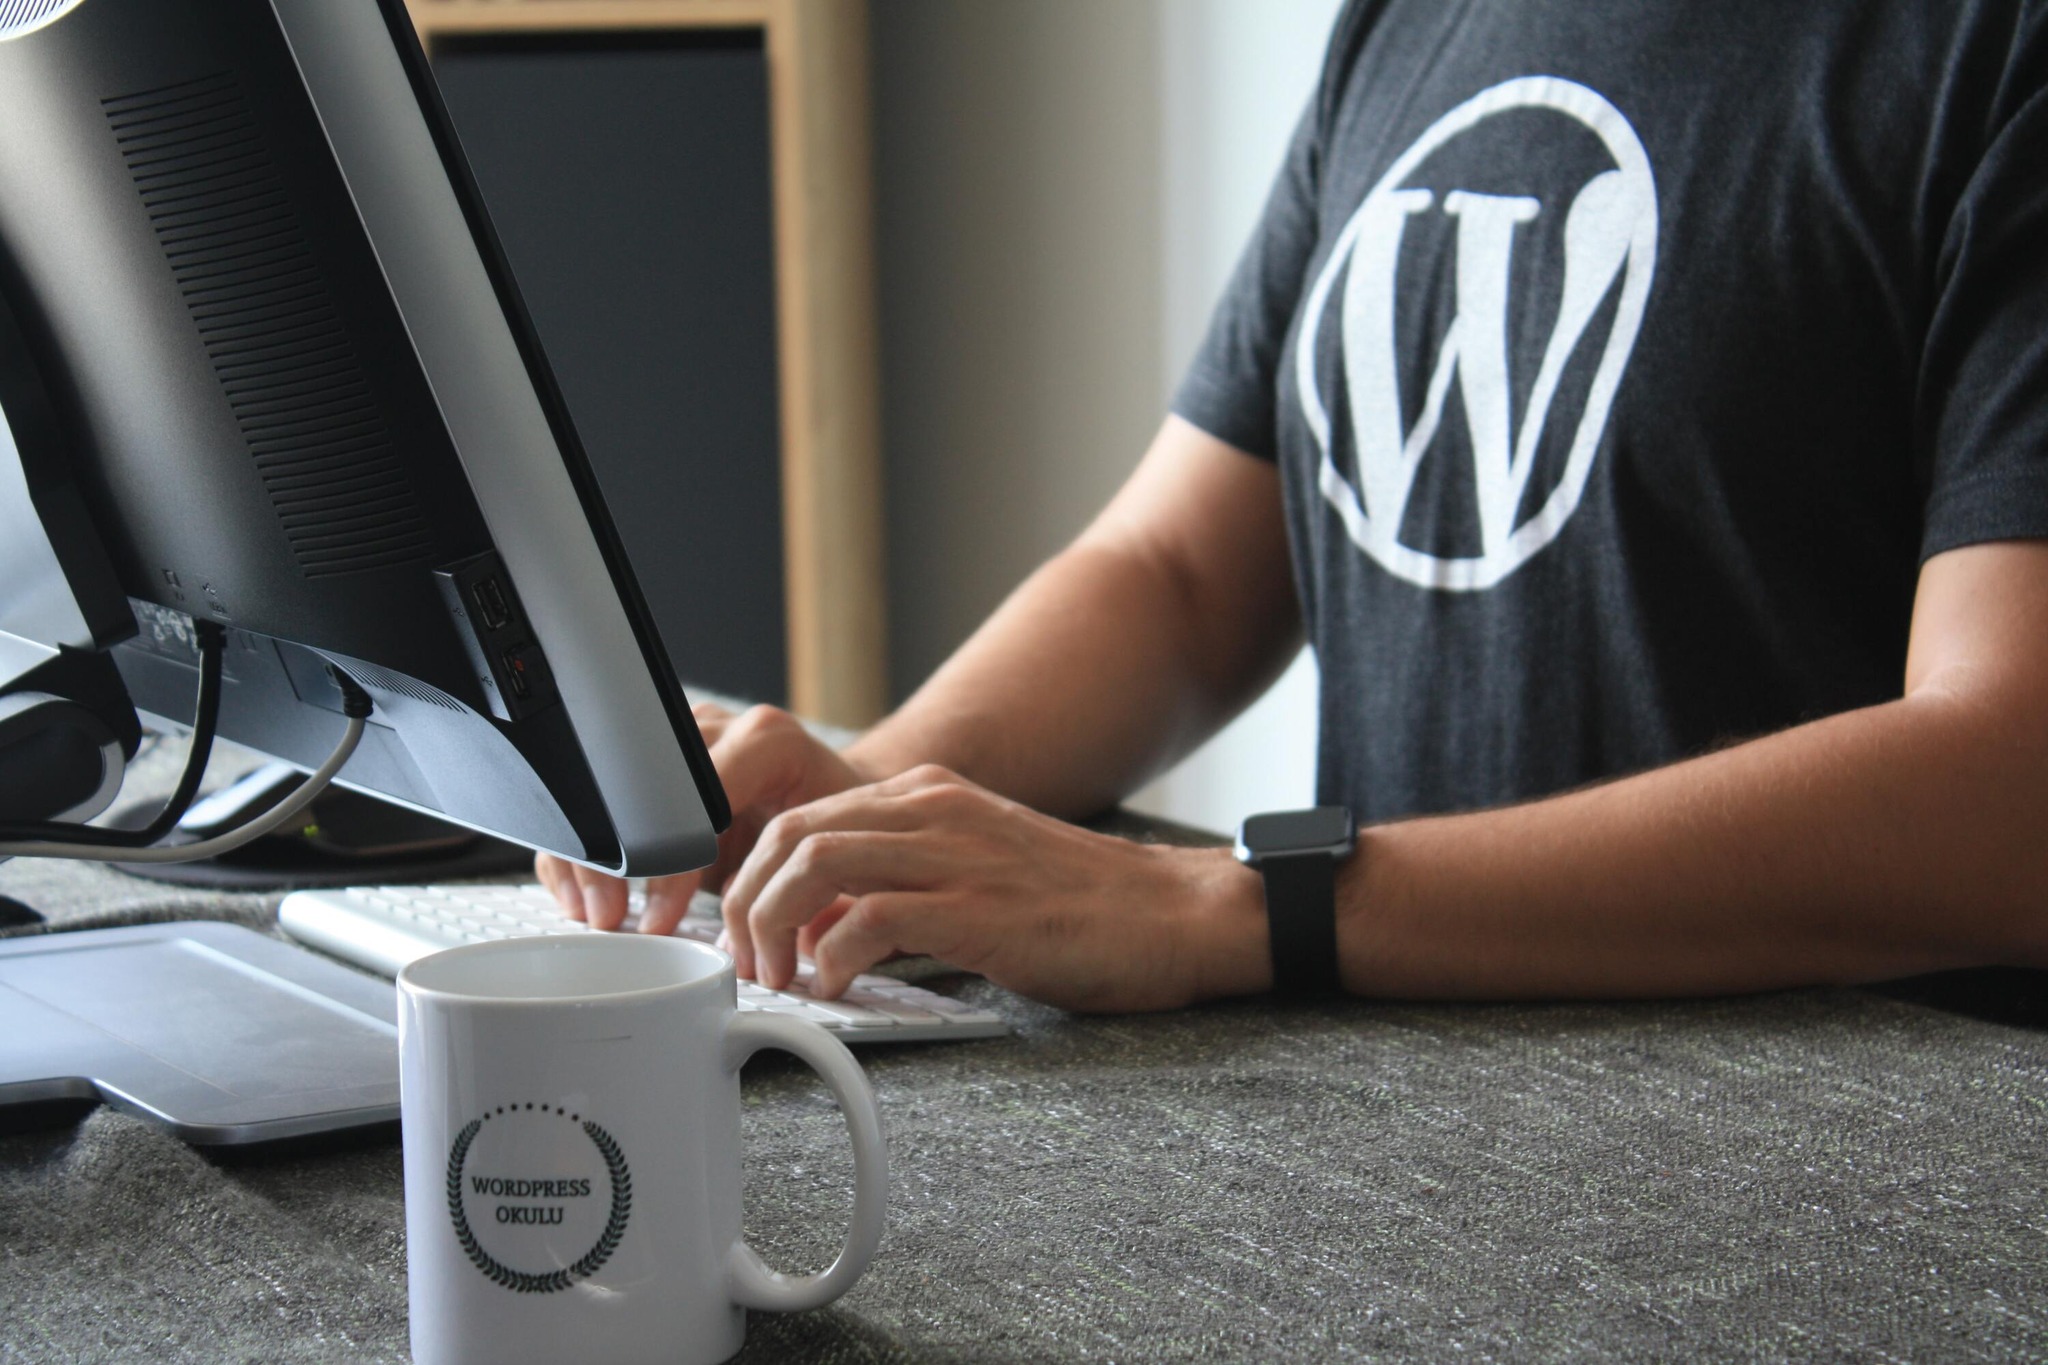 Why WordPress? 8 Benefits to Using WordPress Over Other Content Management Systems